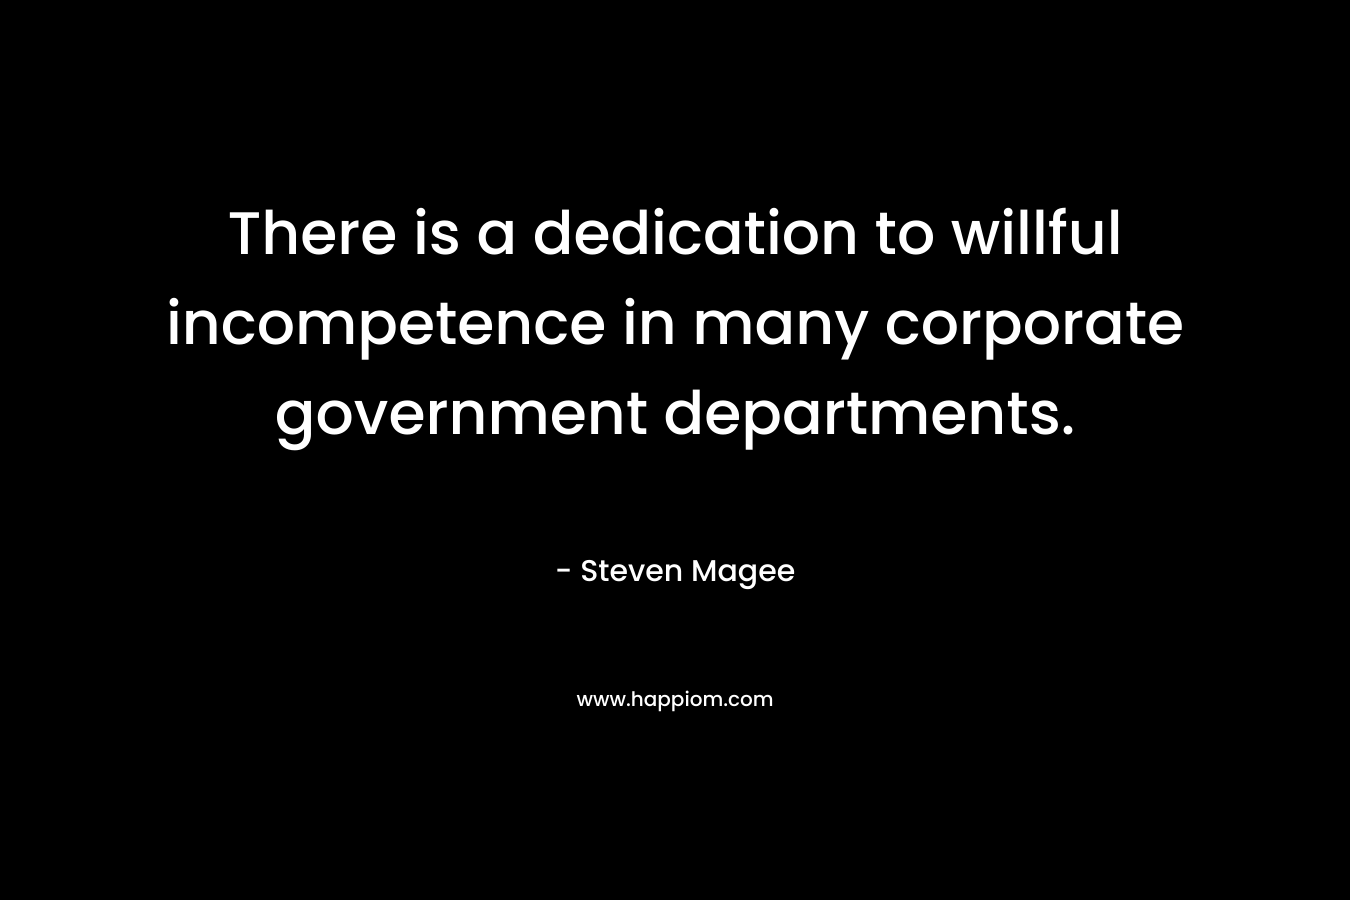 There is a dedication to willful incompetence in many corporate government departments.